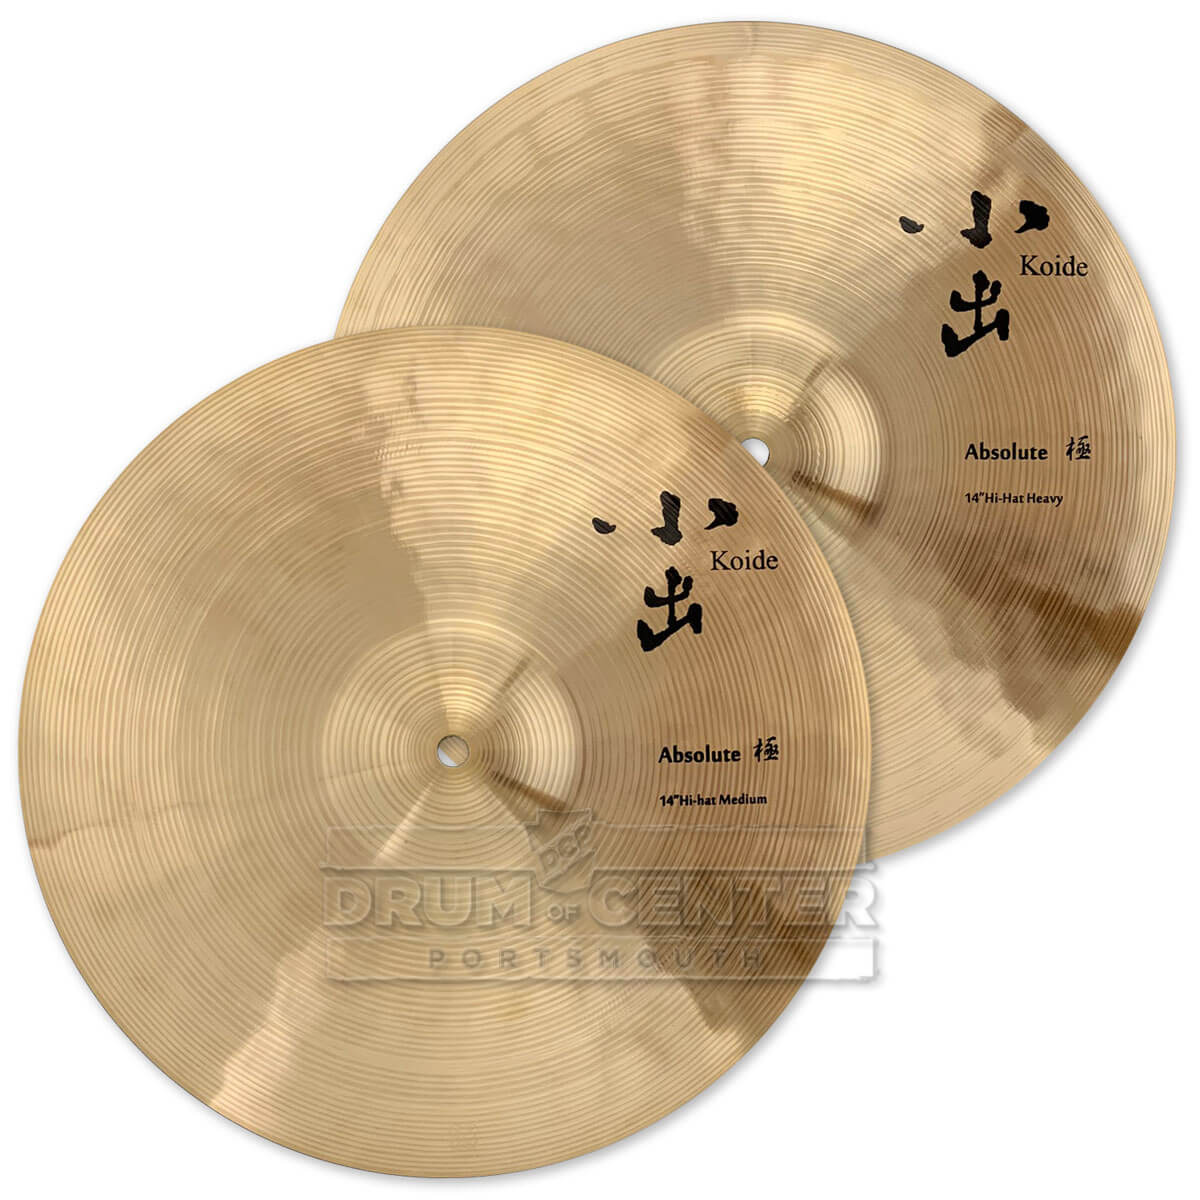 Koide Absolute Hi Hat Cymbals Medium/Heavy 14" 1 grams - Drum Center Of Portsmouth